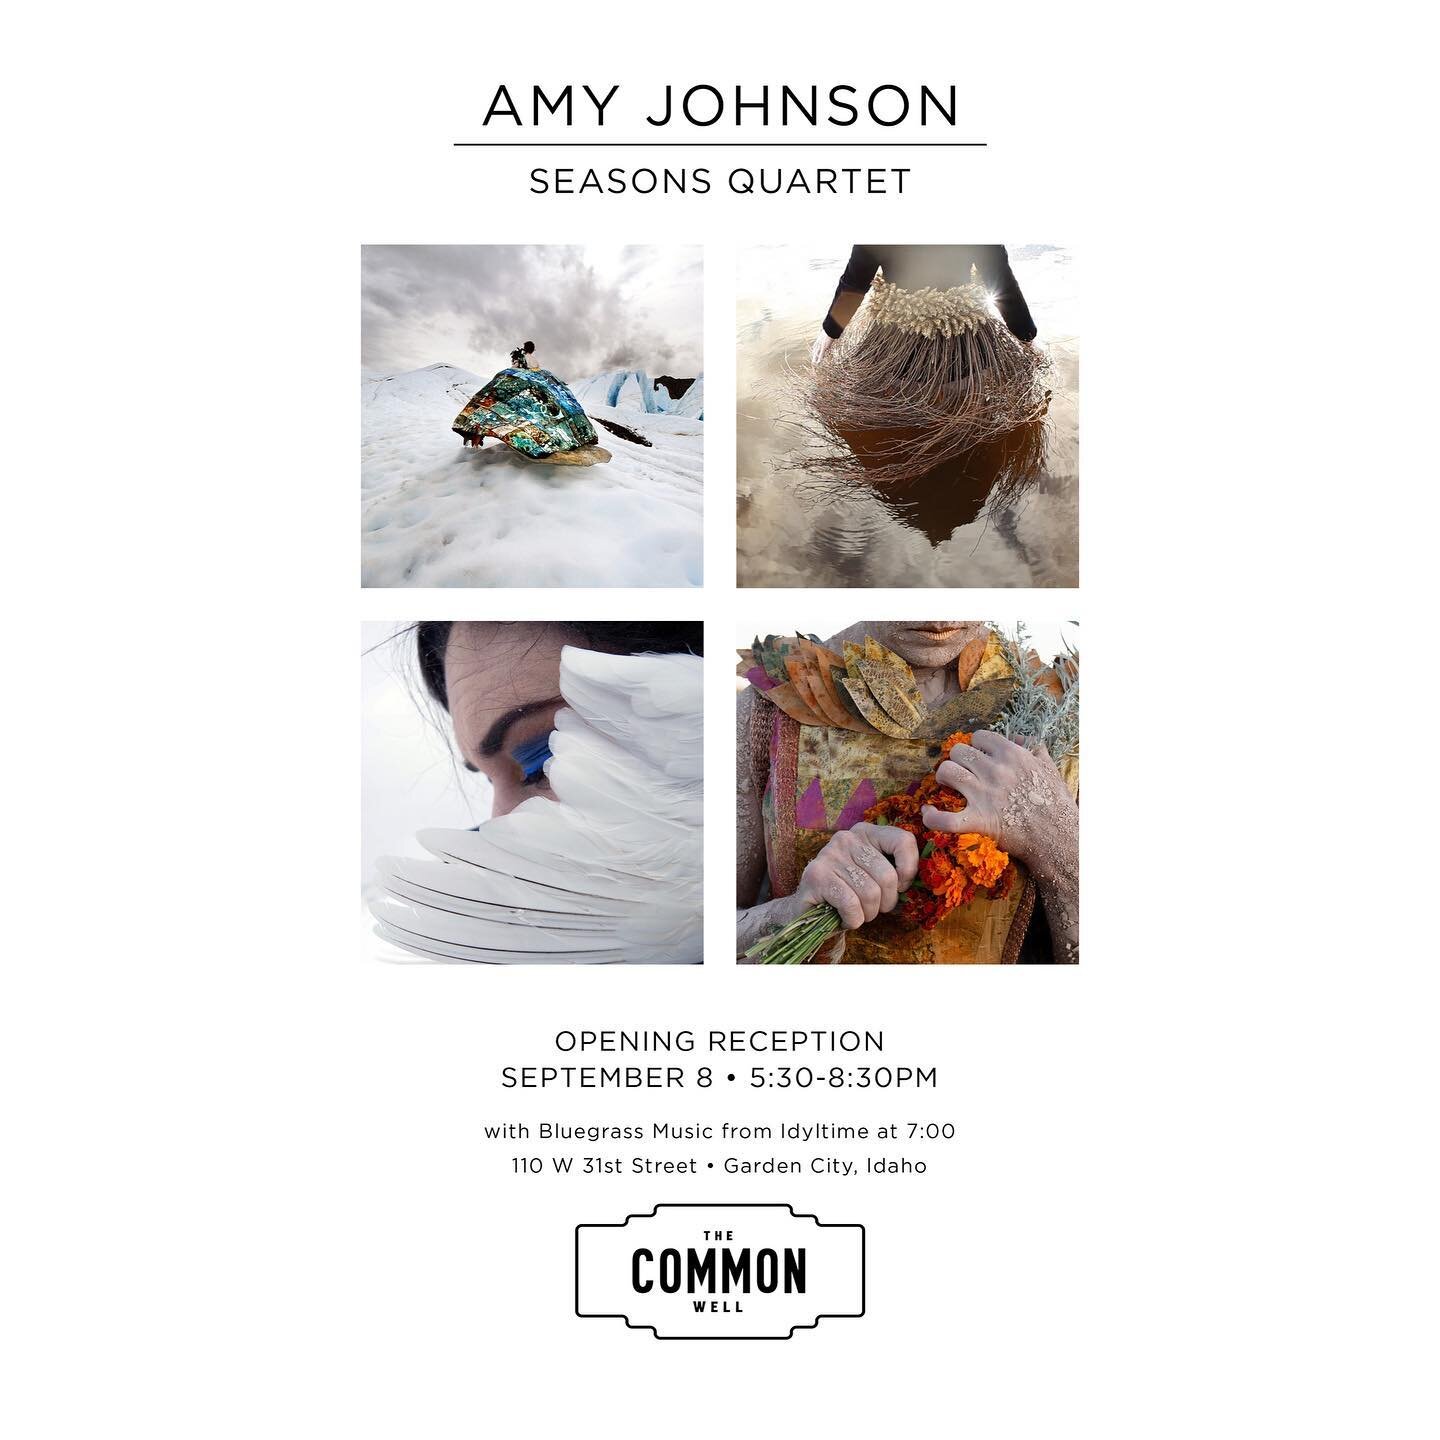 We&rsquo;ll be serving drinks at @commonwellboise on Friday for @amyjohnsonstudio&rsquo;s exhibition opening entitled &ldquo;Seasons Quartet&rdquo;. @idyltime will be playing too! Come check out her work that is 12 years in the making. 

30% of our s